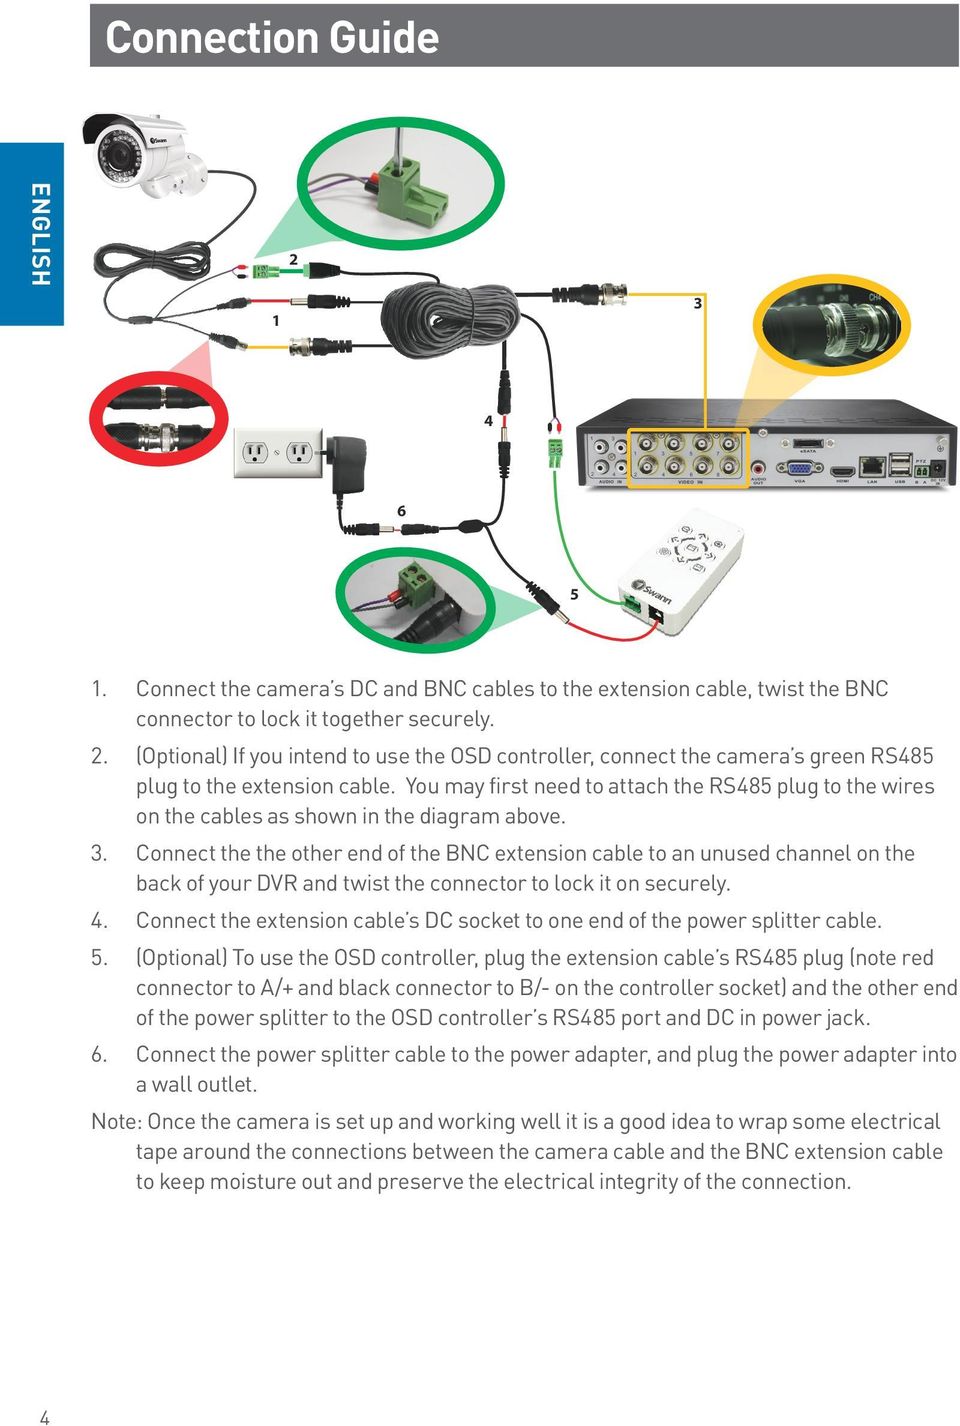 Connect the the other end of the BNC extension cable to an unused channel on the back of your DVR and twist the connector to lock it on securely. 4.